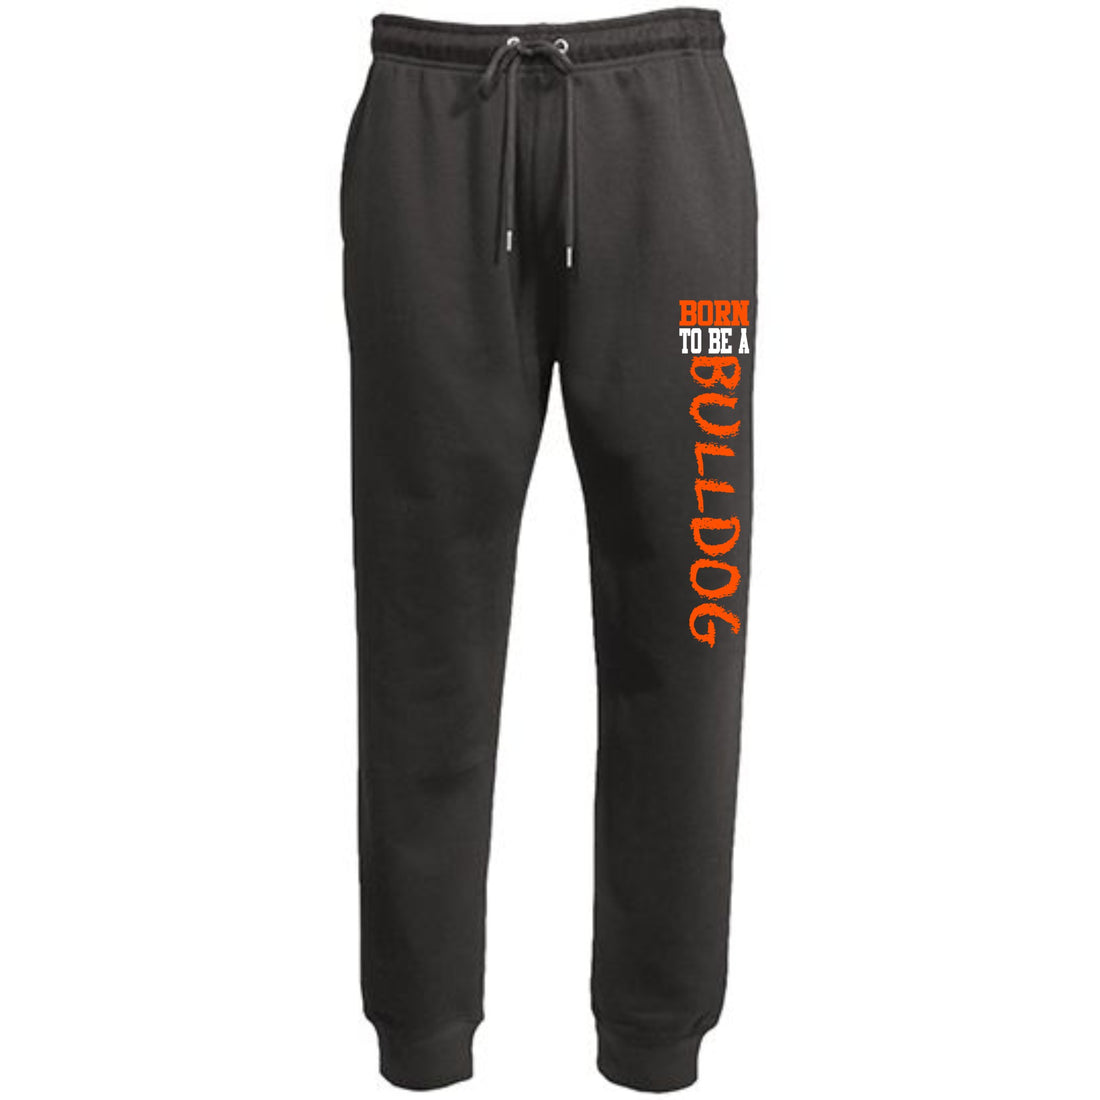 Born To Be A Bulldog Premium Joggers - PRACTICE APPROVED